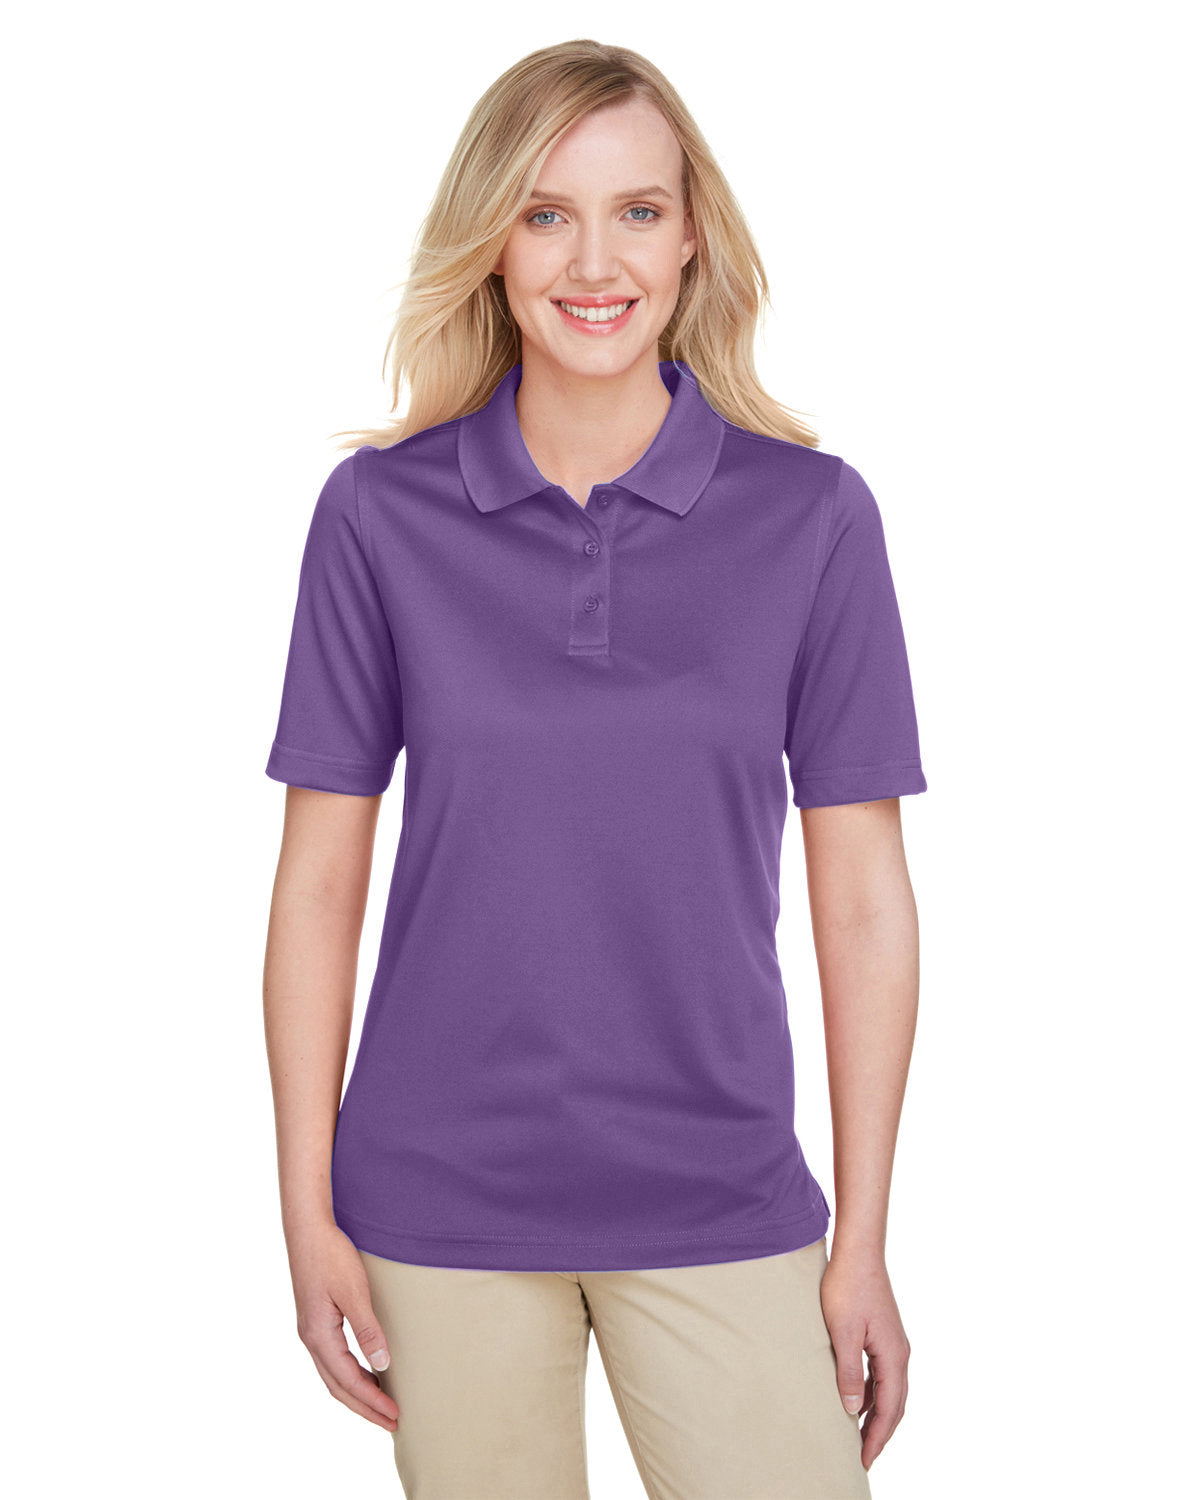 Ladies Protection Plus, Performance Polos (embroidered) - Antimicrobial - BRNDURNAME